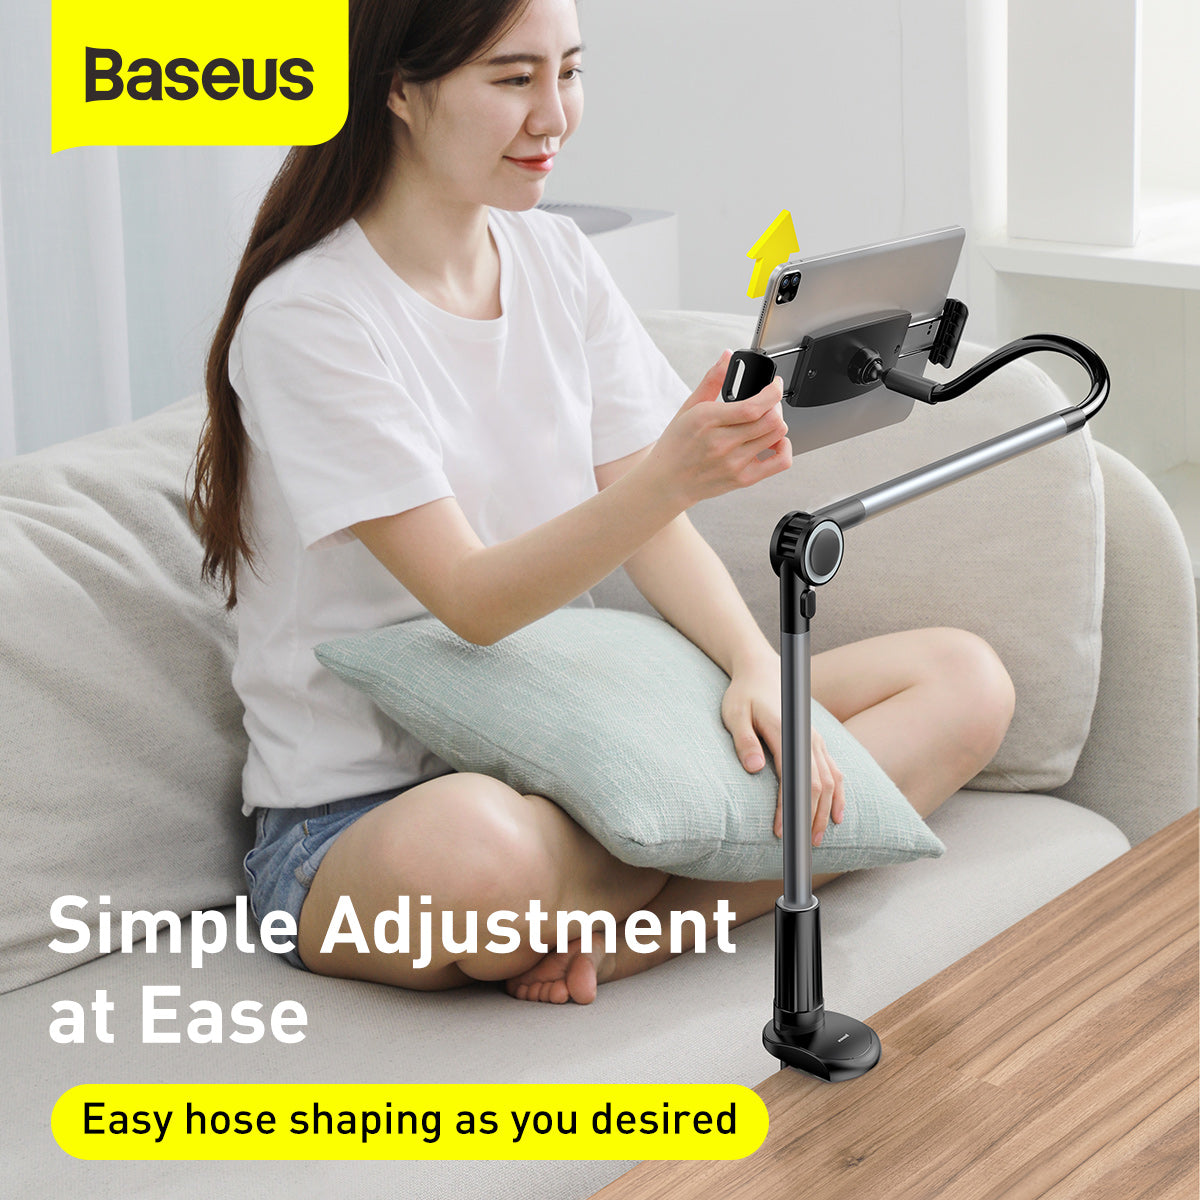 BASEUS Otaku PRO Phone Tablet Flexible Stand Holder Bracket Clamp Long Arms Mount Holder 4.7-12.9 inches